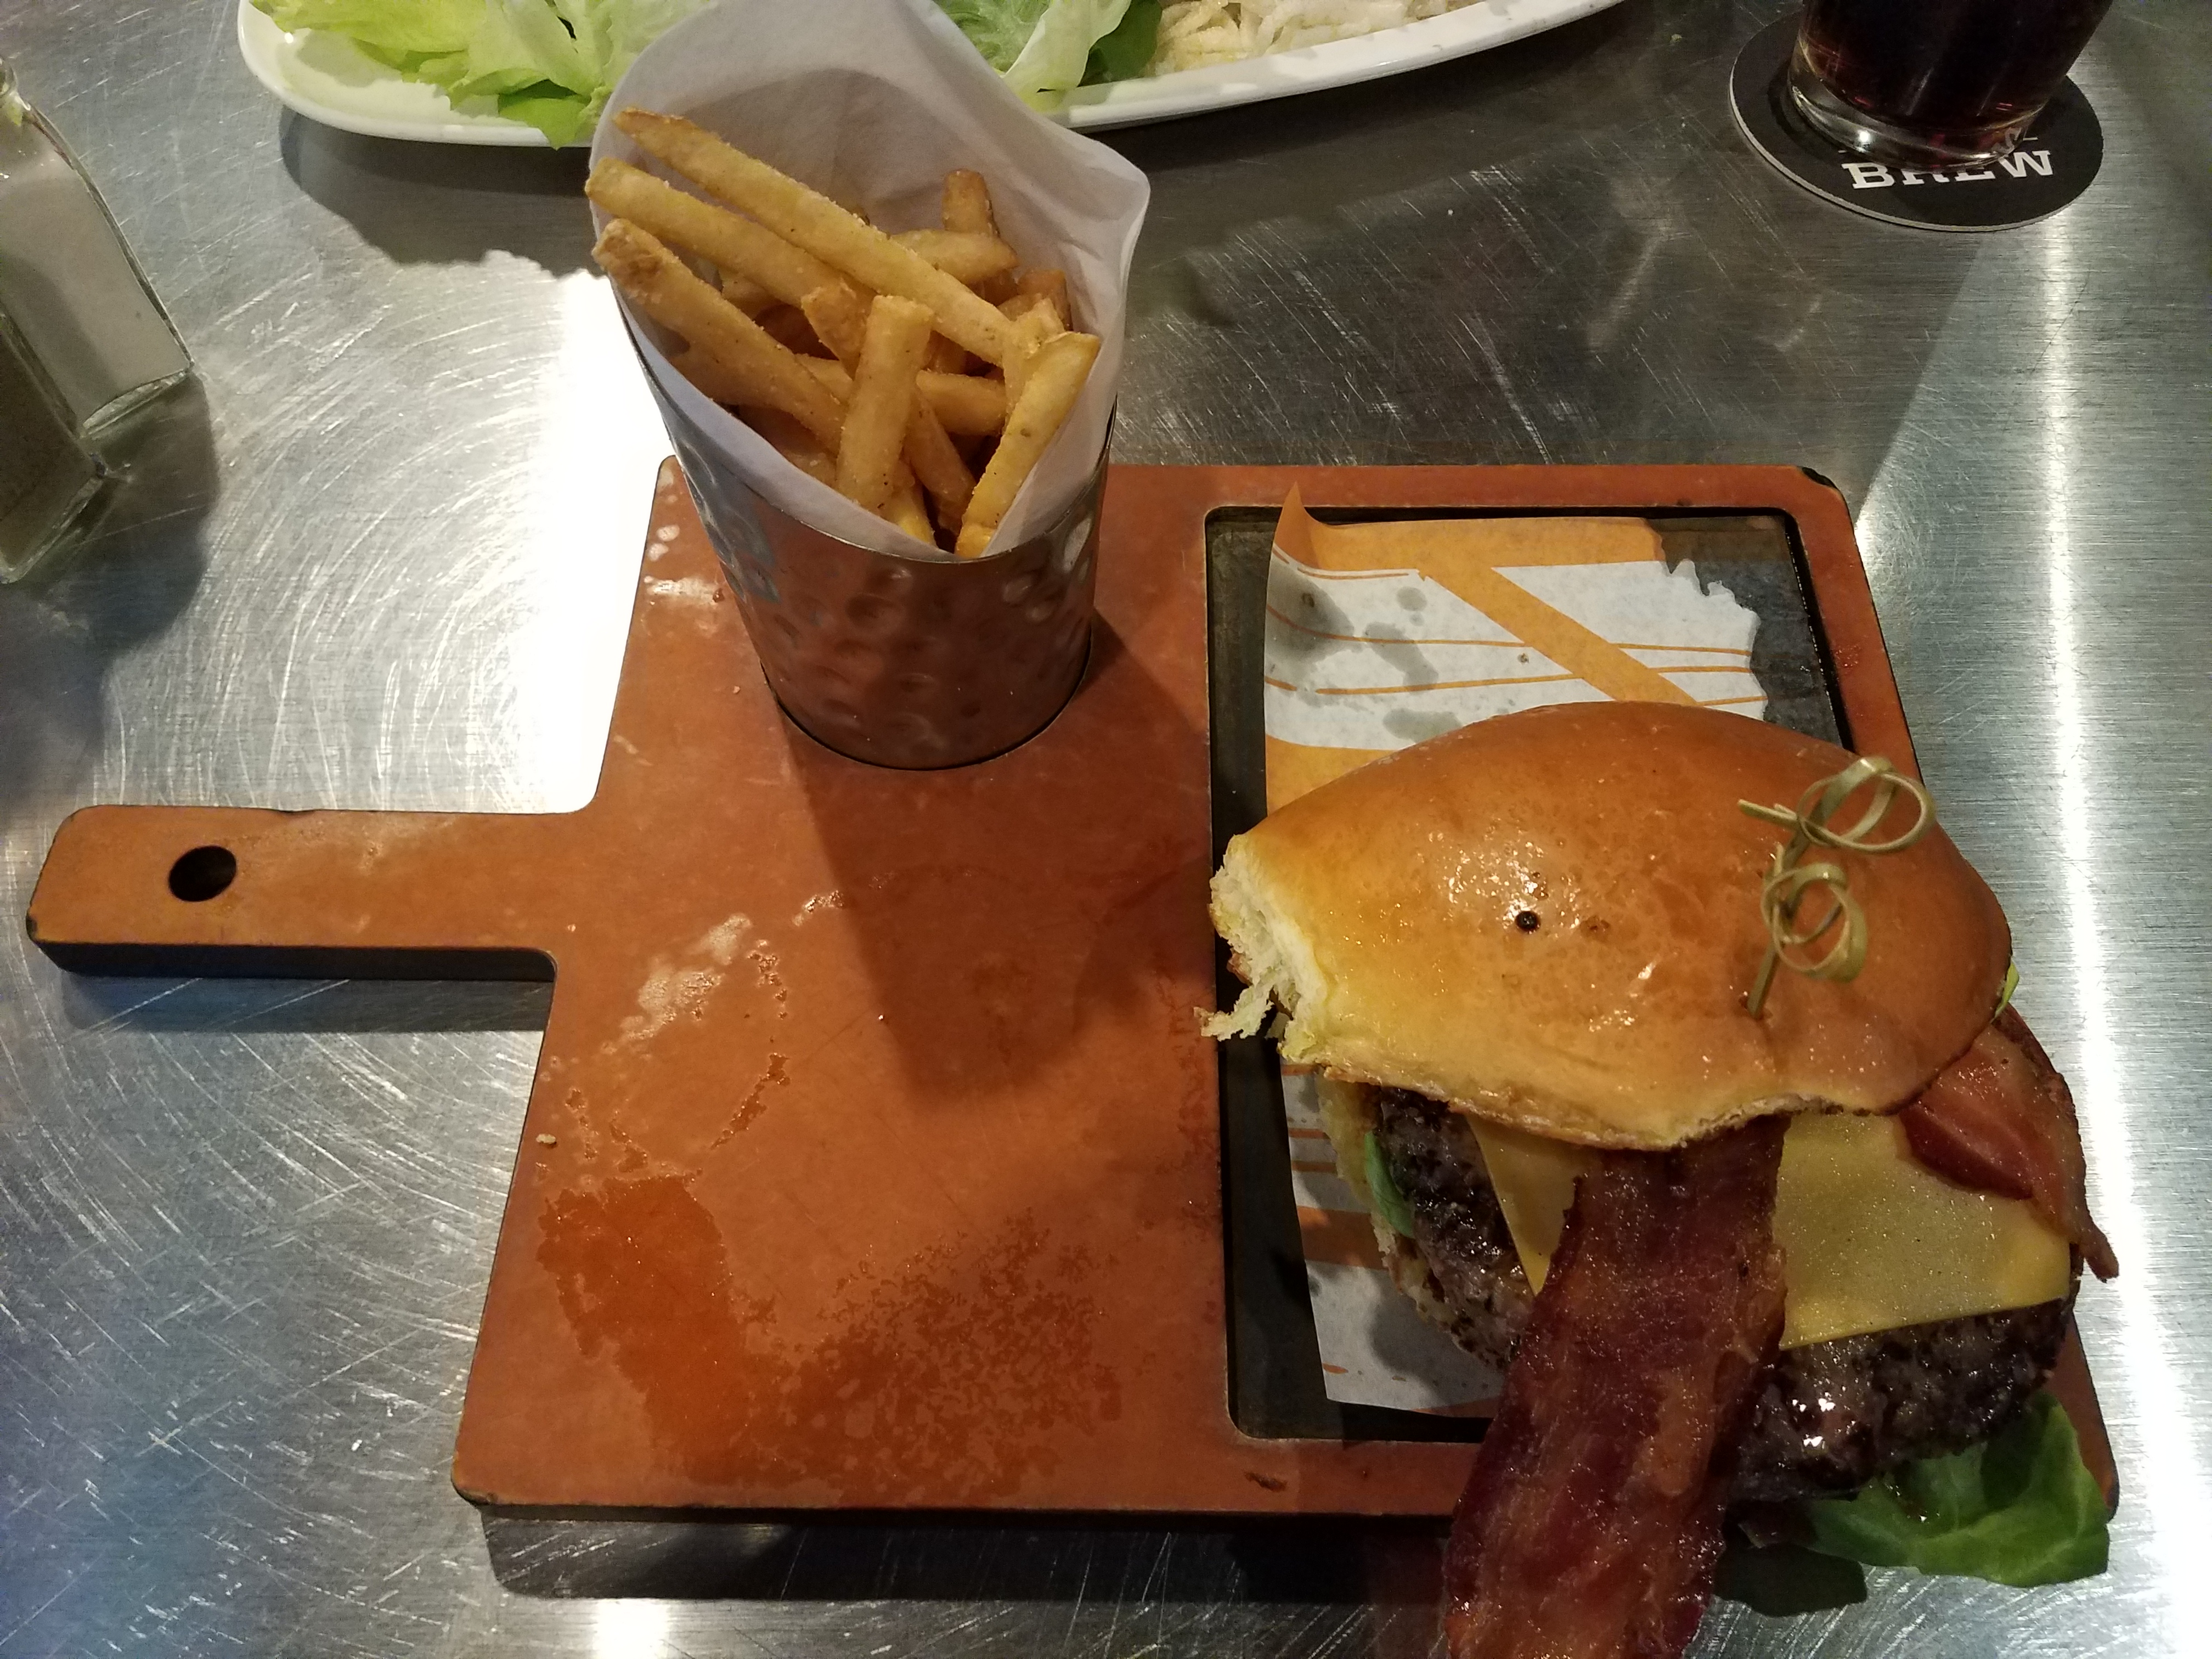 Wisconsin burger with fries at NBC Sports Grill & Brew in Universal's CityWalk - by unofficialuniversal.com.